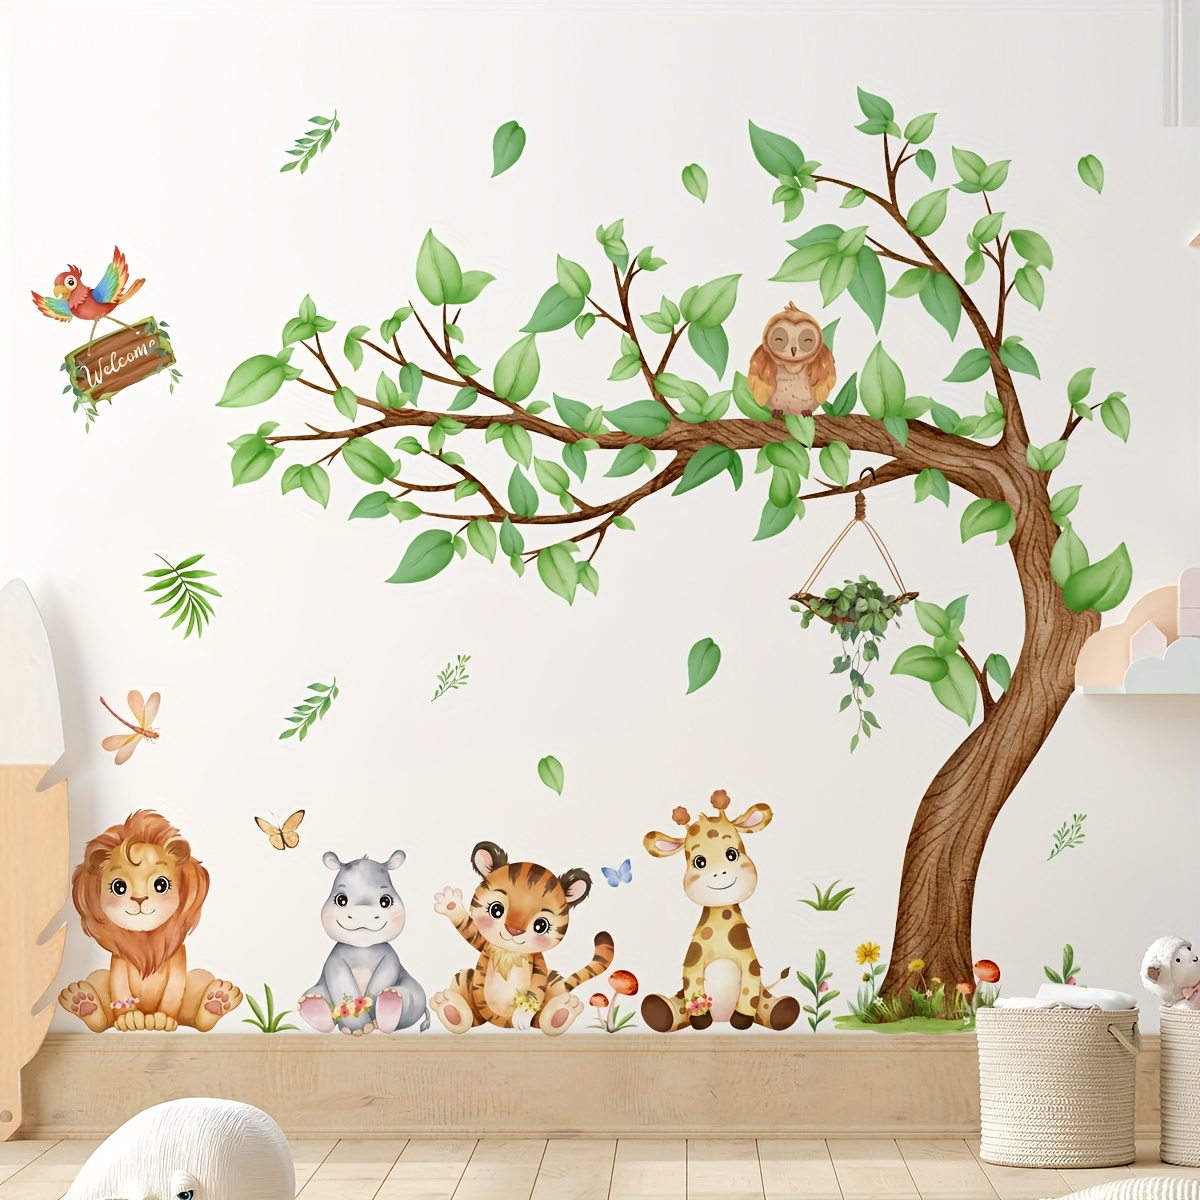 

6pcs Creative Wall Sticker, Large Tree Cartoon Animal Pattern Self-adhesive Wall Stickers, Bedroom Entryway Living Room Porch Home Decoration Wall Stickers, Removable Stickers, Wall Decor Decals